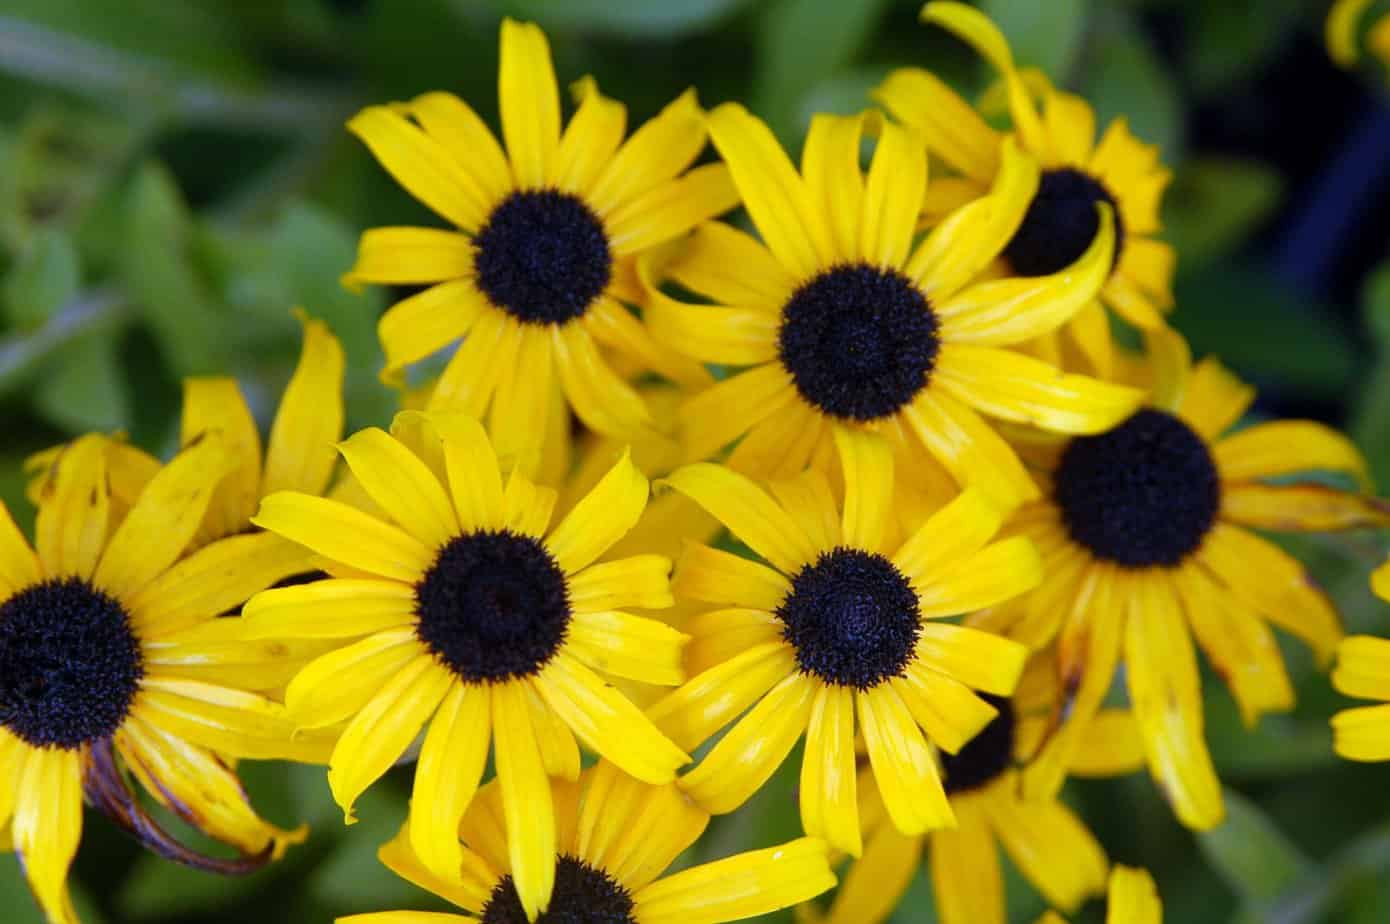 Do black-eyed susans come back every year